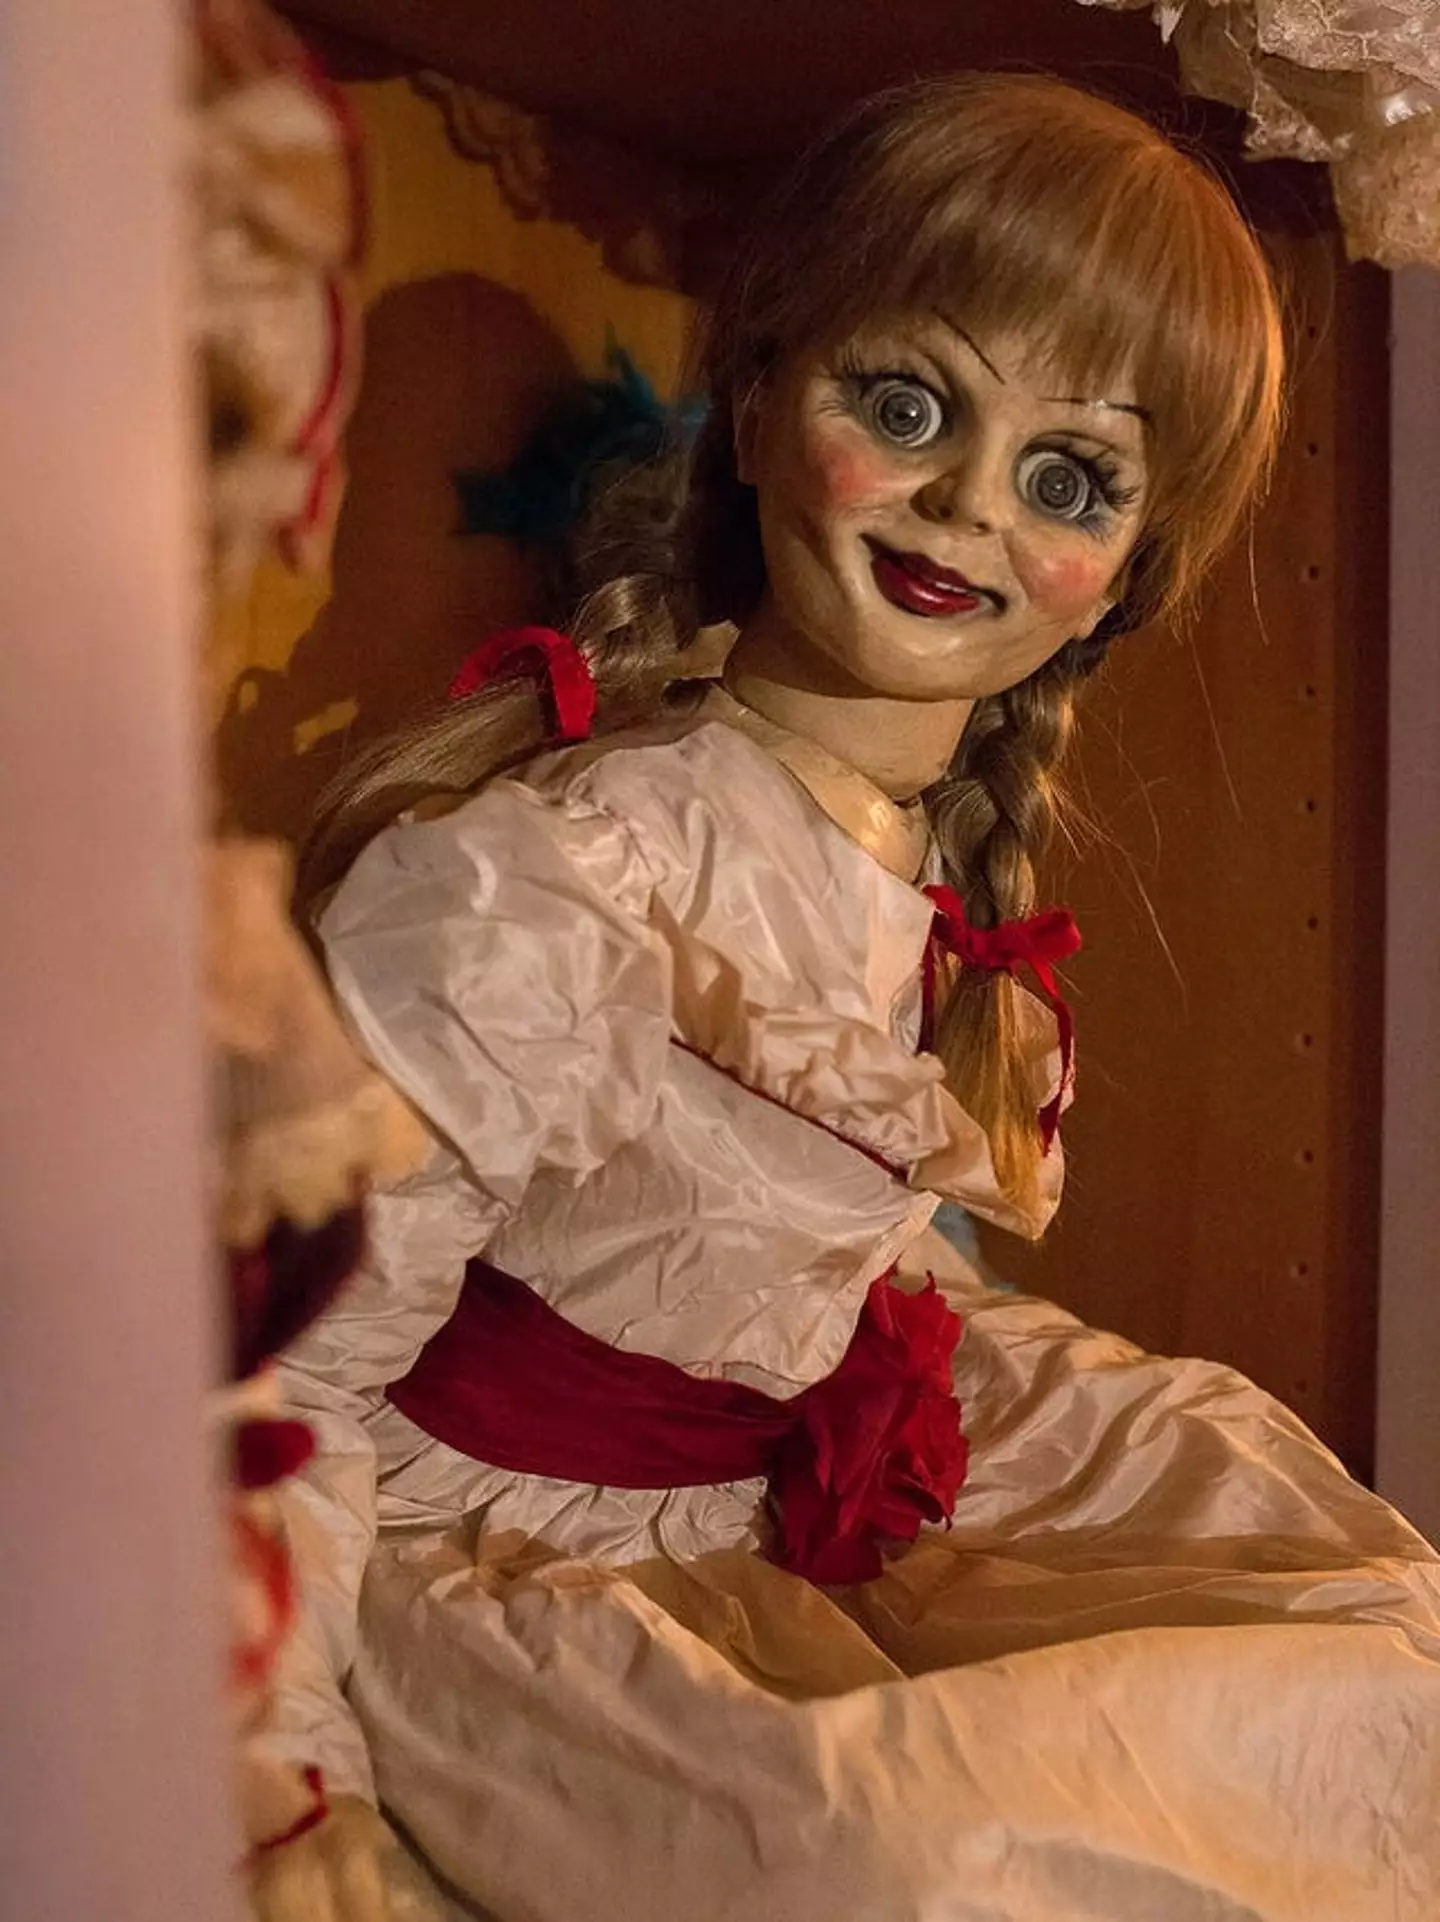 Annabelle is part of 'The Conjuring' universe. (